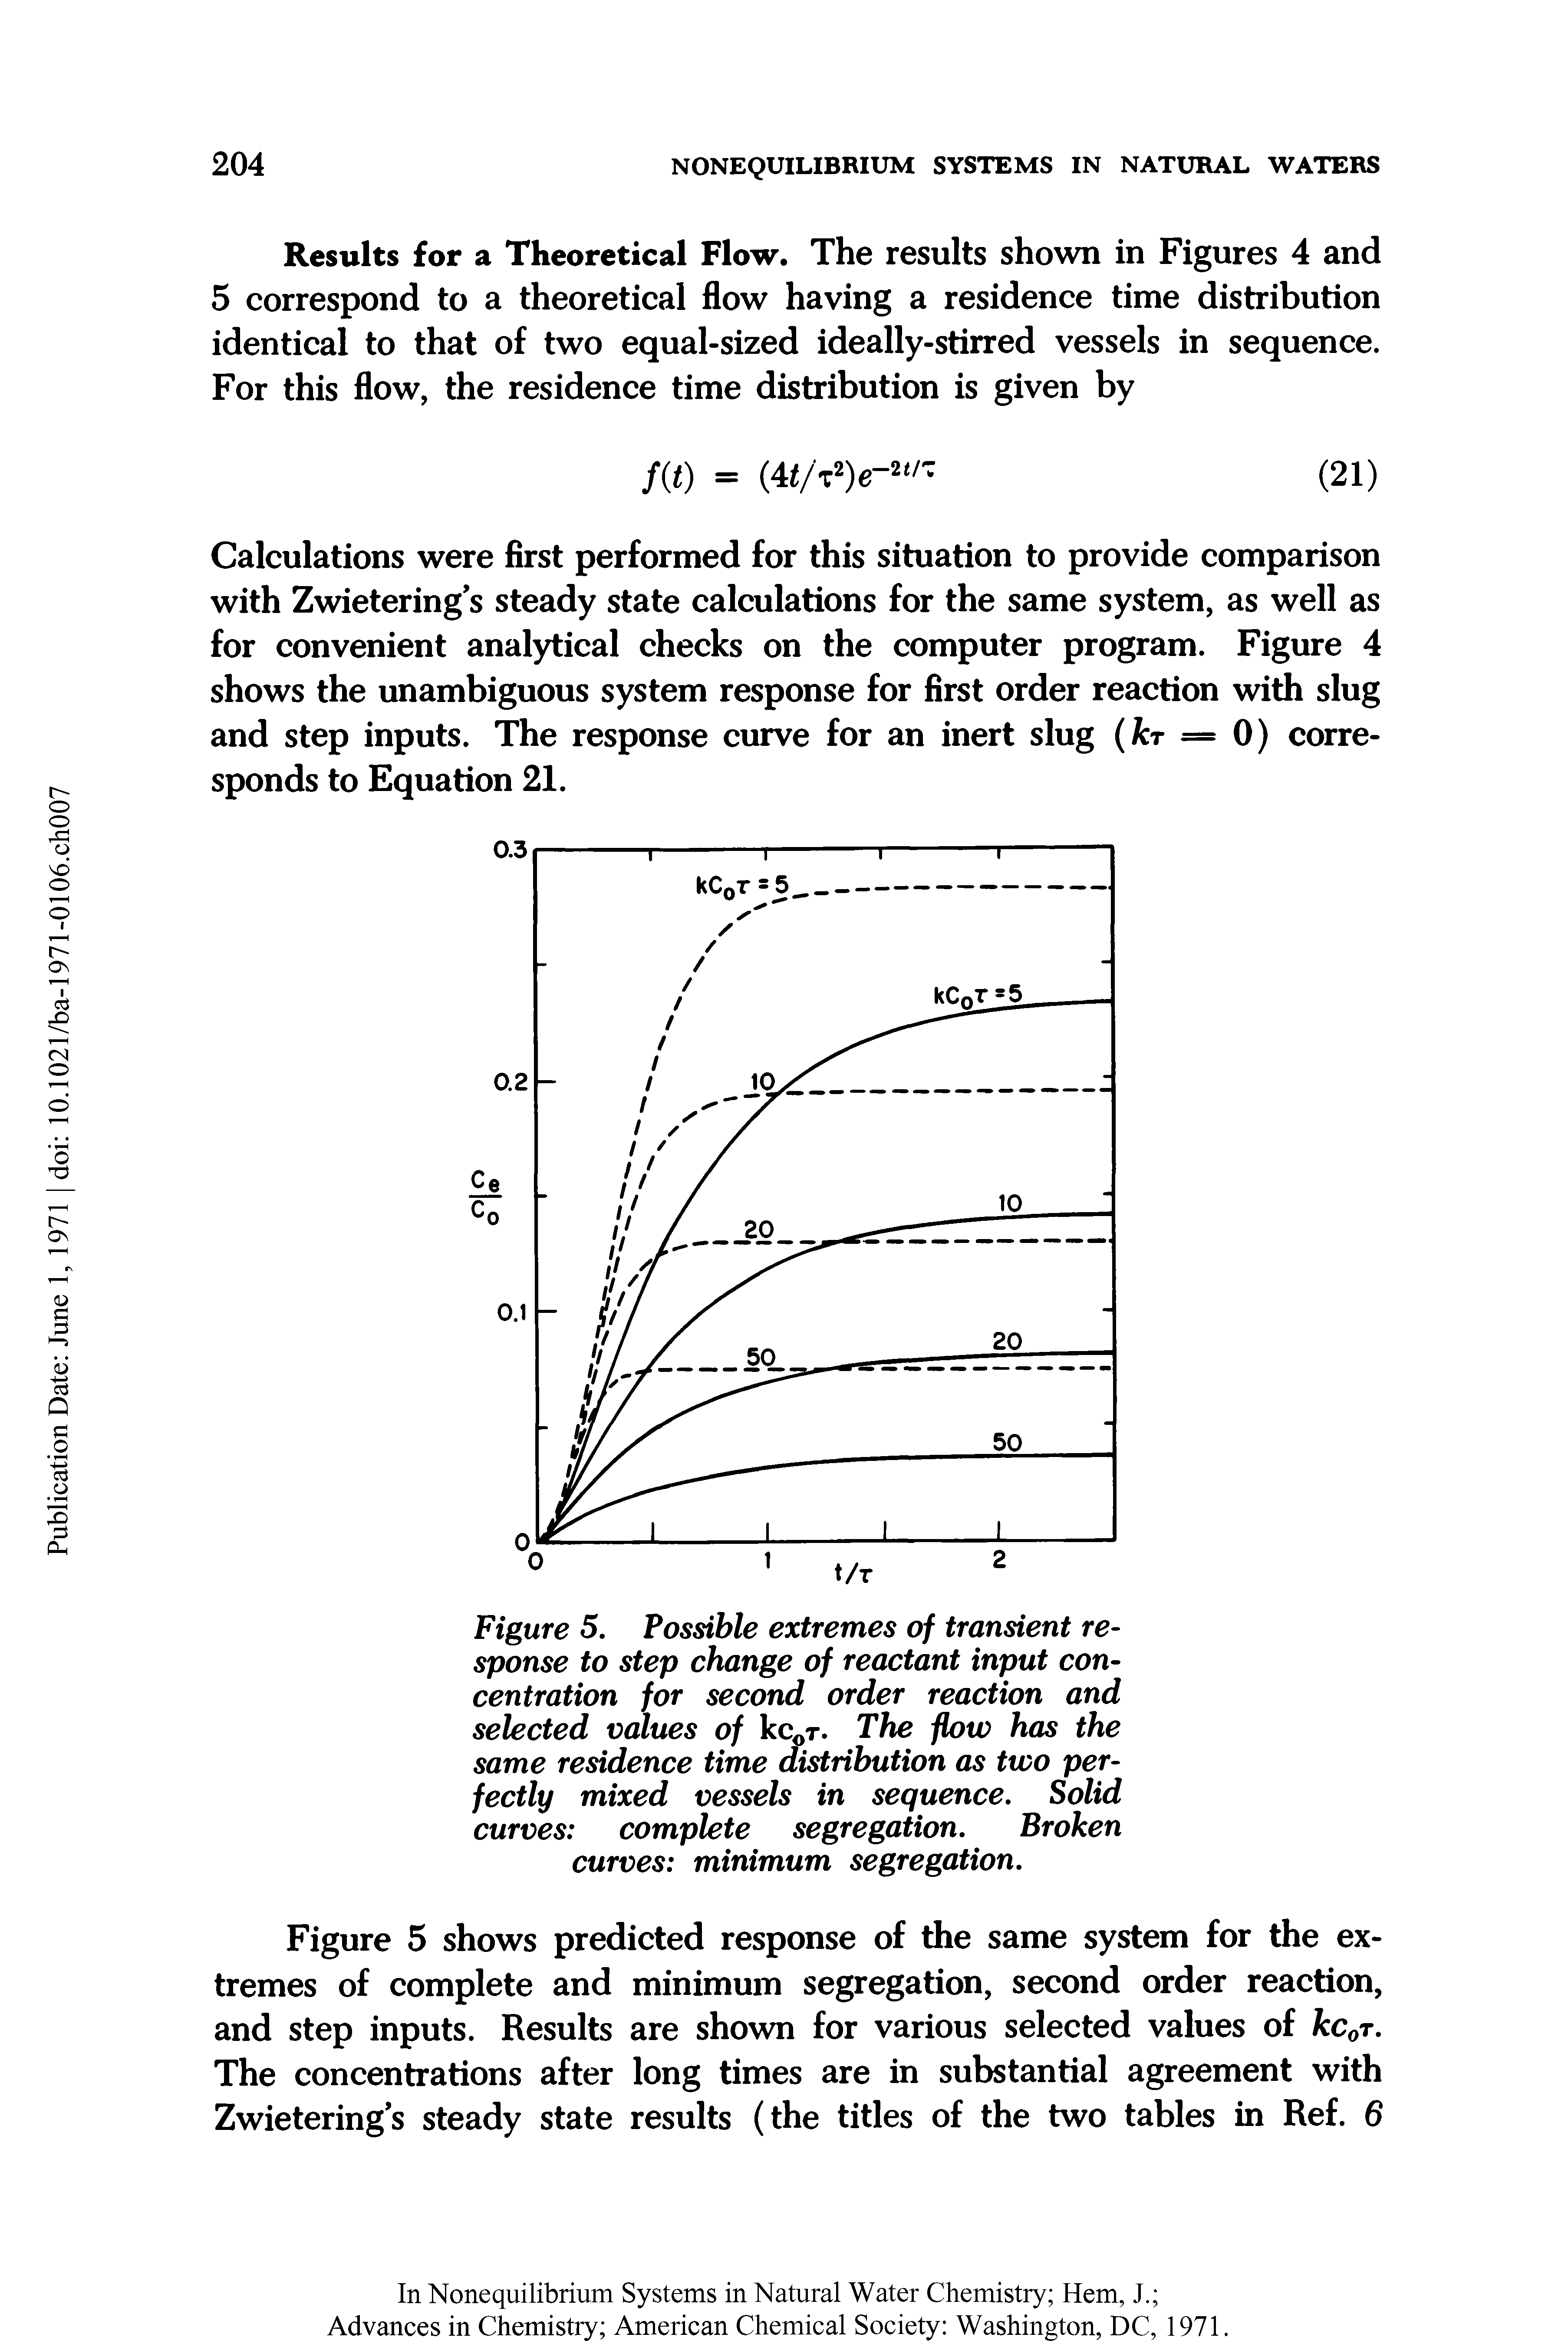 Figure 5. Possible extremes of transient response to step change of reactant input concentration for second order reaction and selected values of kccT. The flow has the same residence time distribution as two perfectly mixed vessels in sequence. Solid curves complete segregation. Broken...